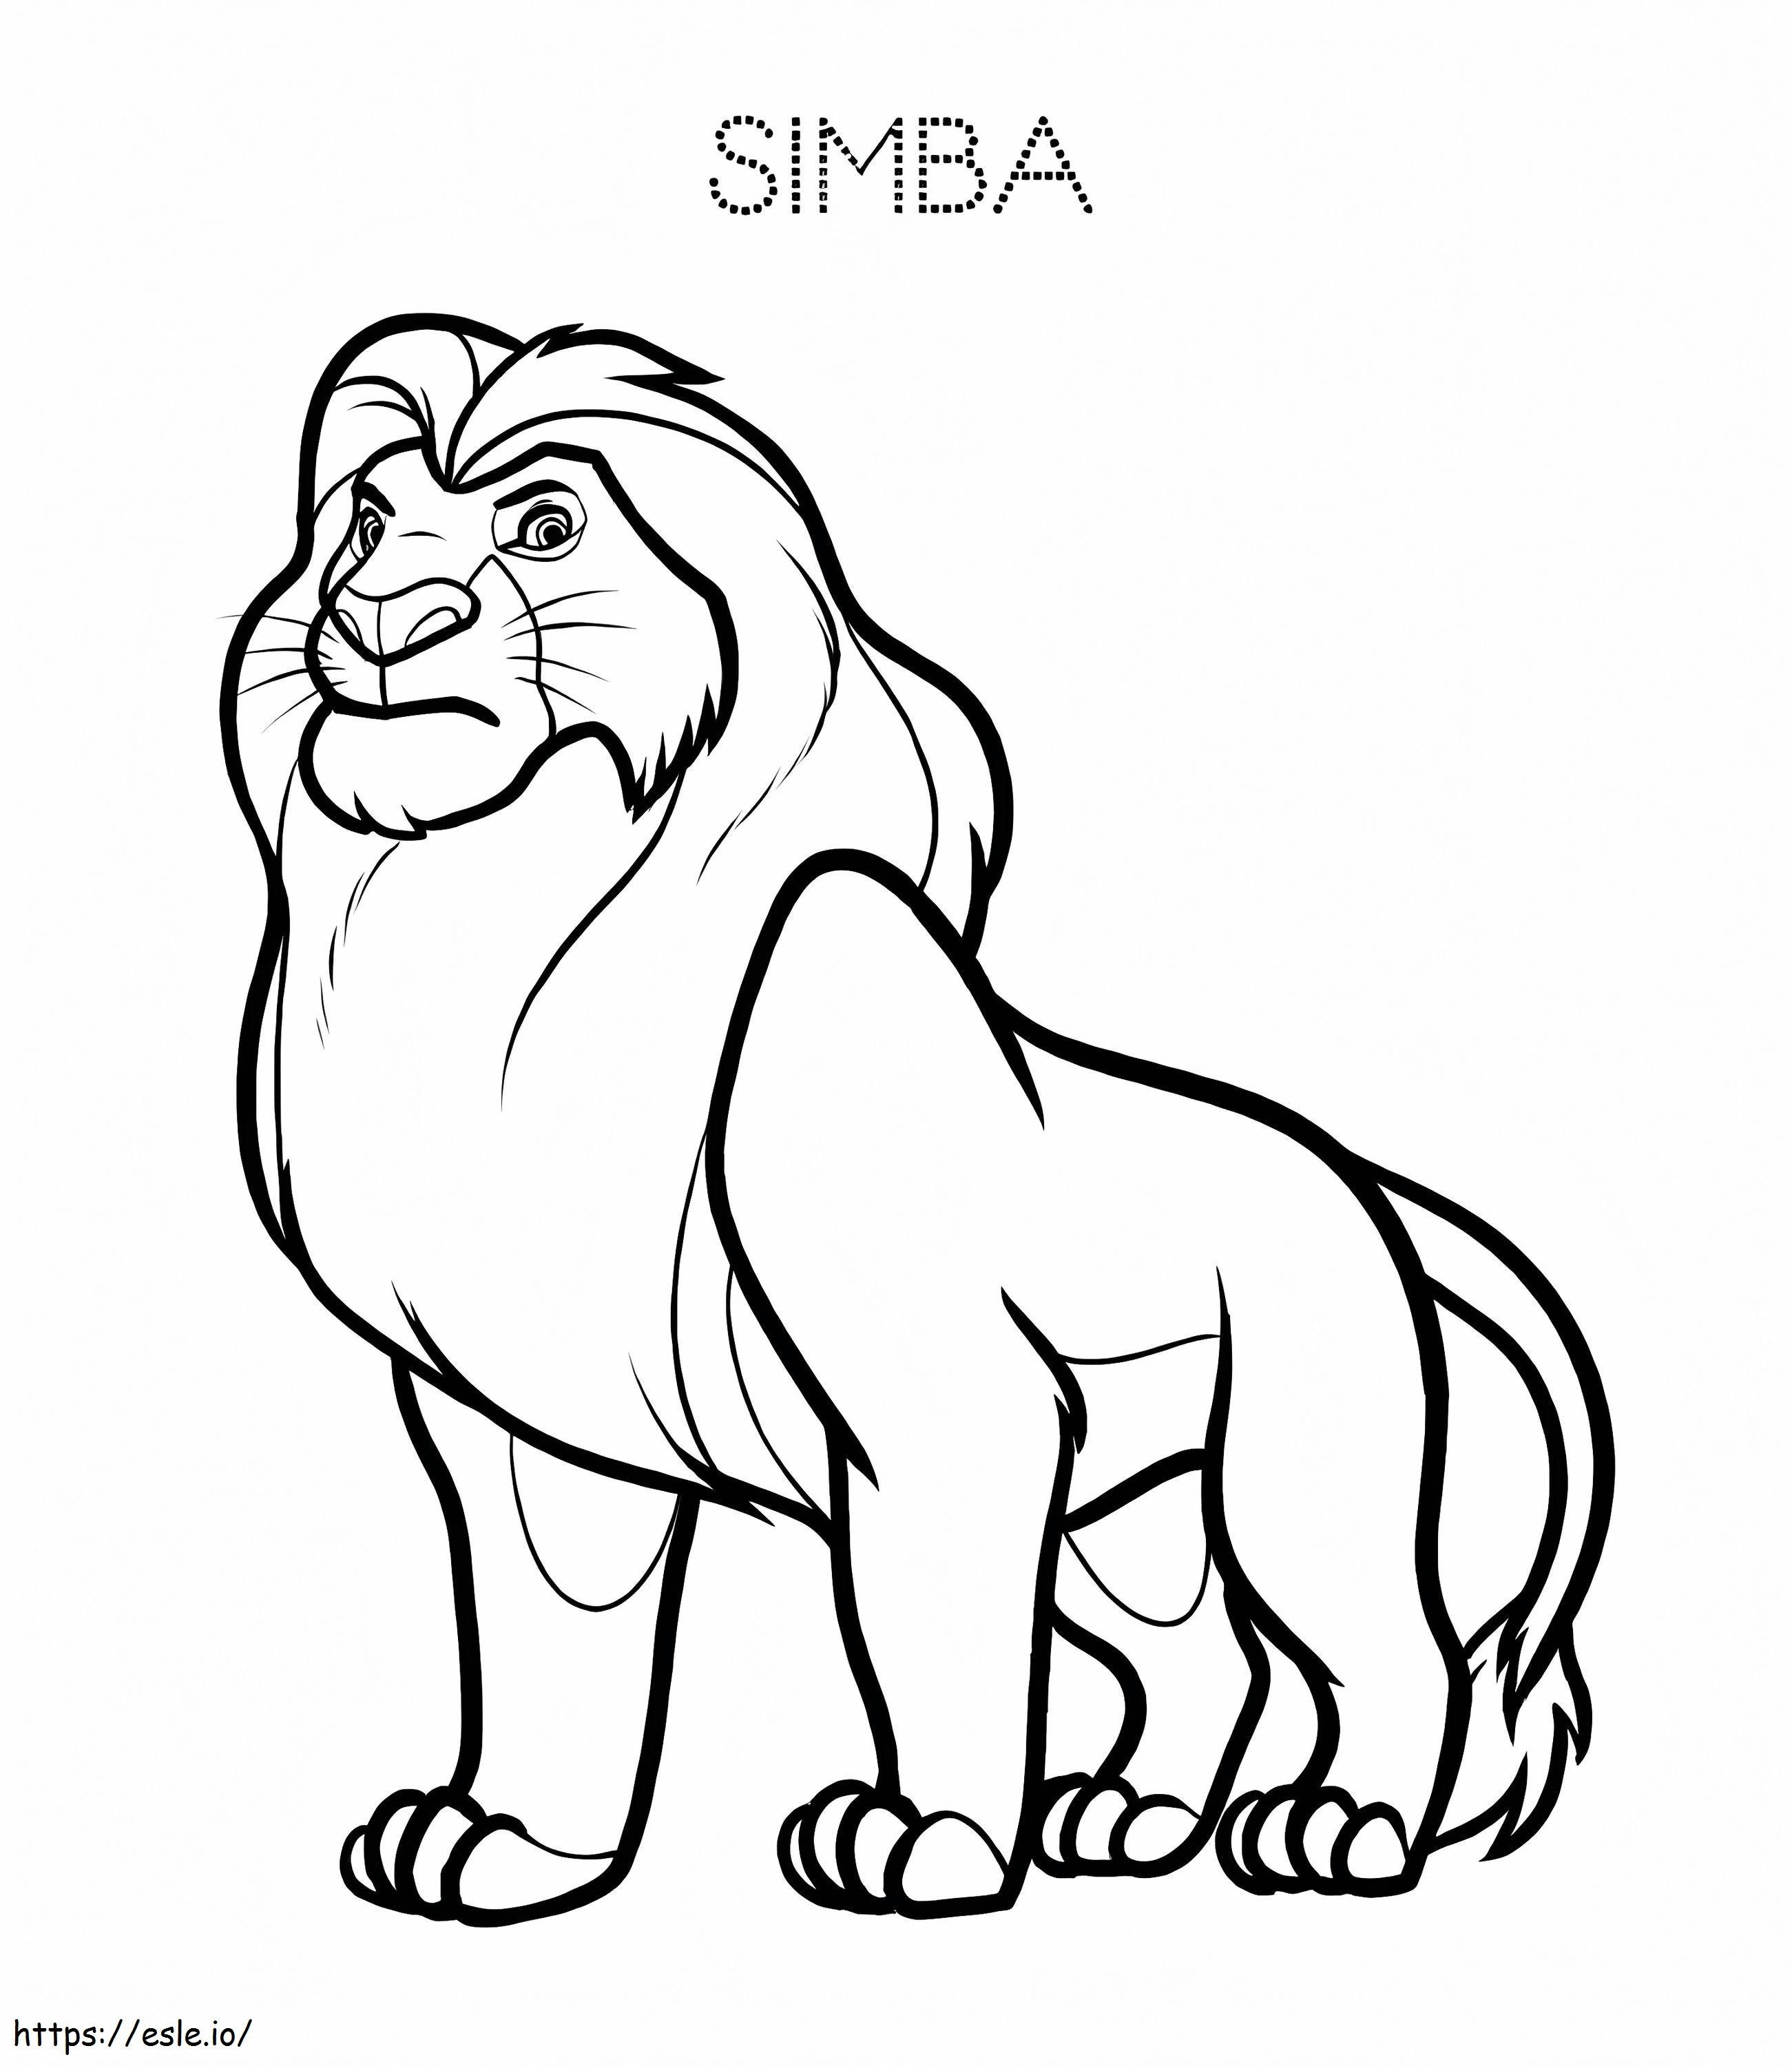 Strong Simba coloring page